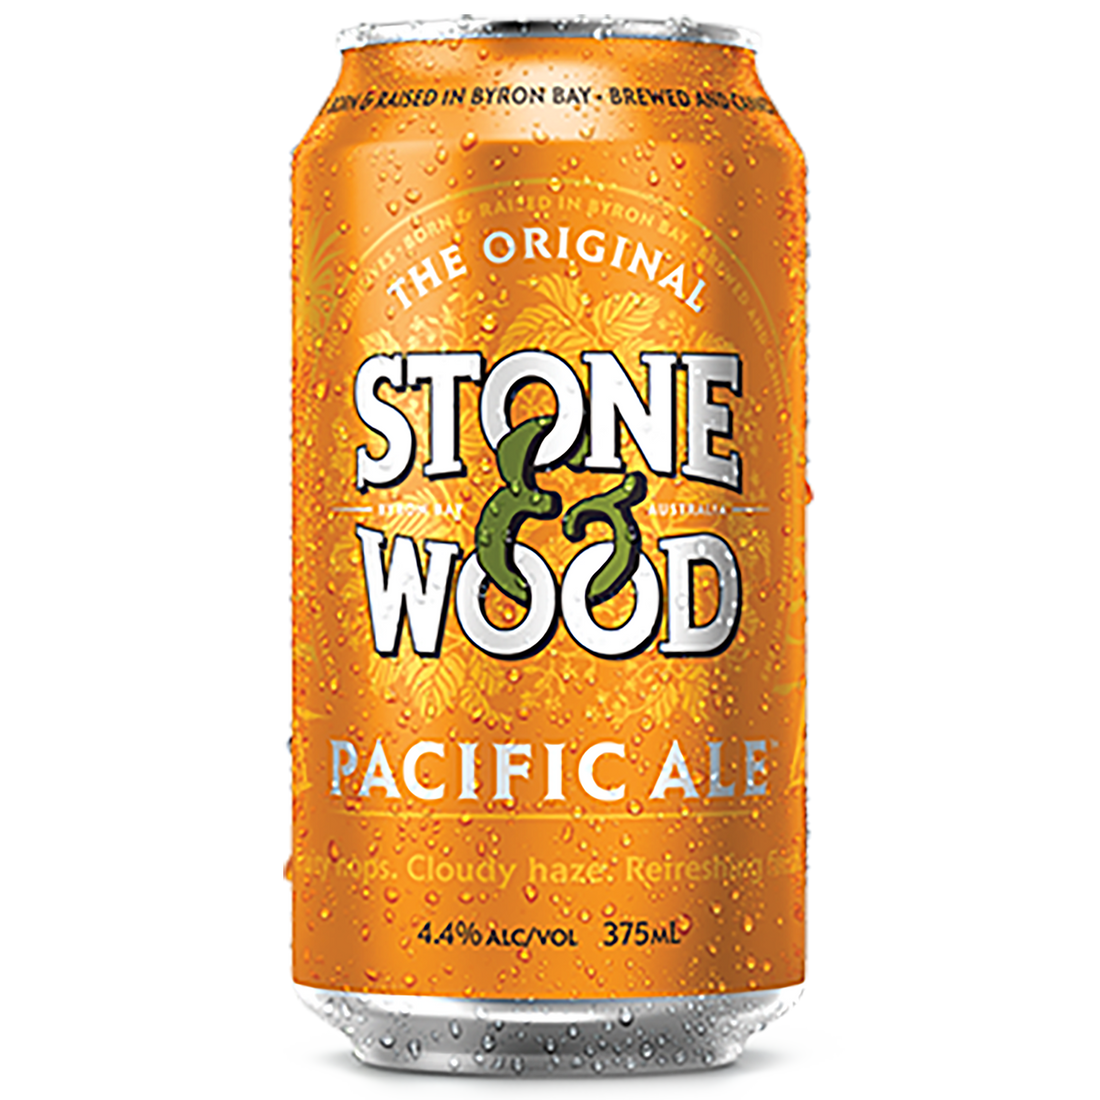 Pacific Ale 375ml can